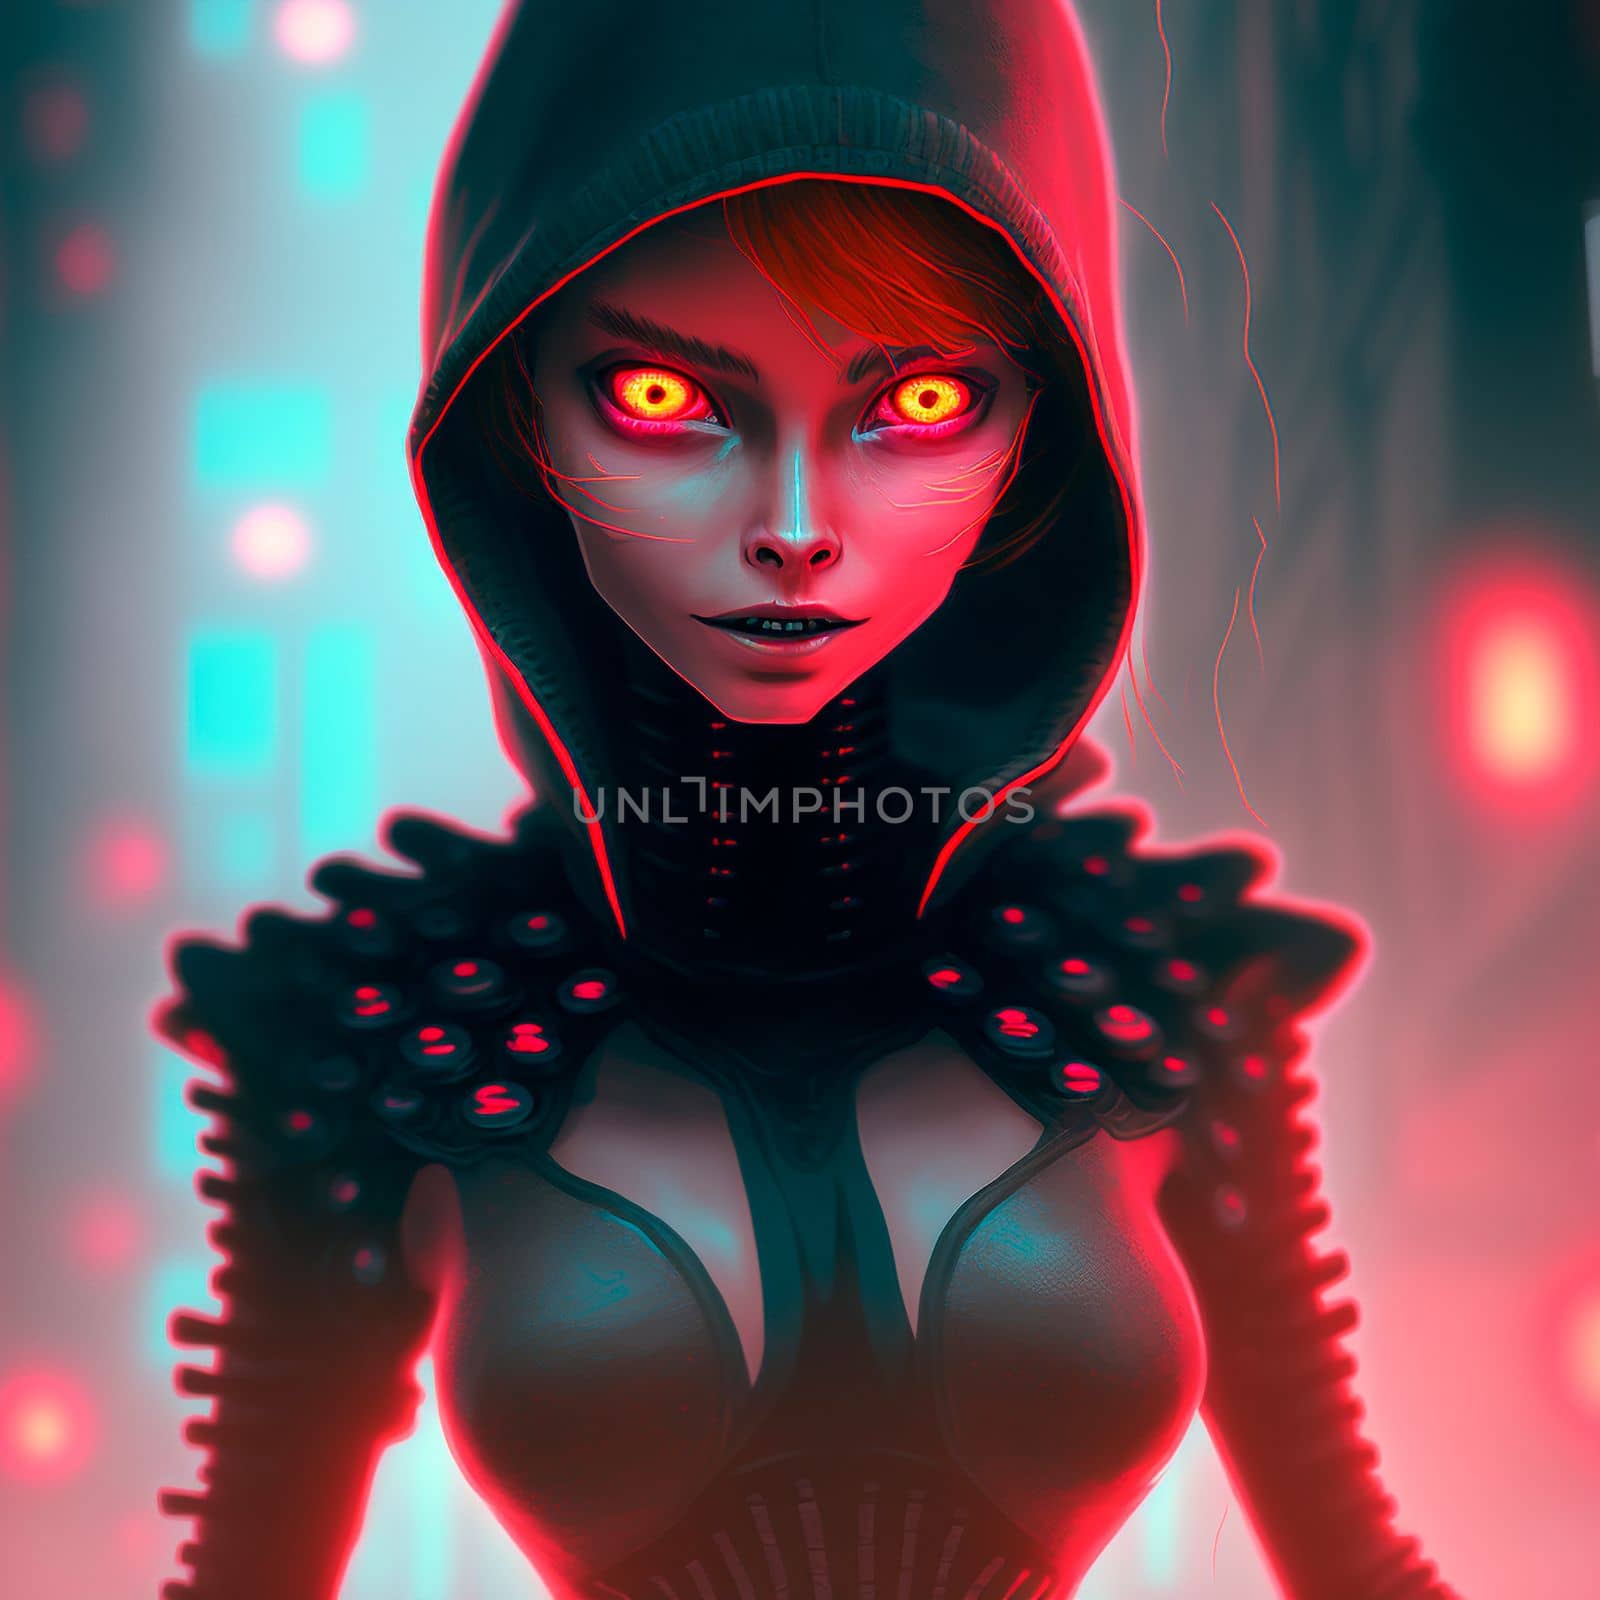 Mysterious girl with red eyes by NeuroSky